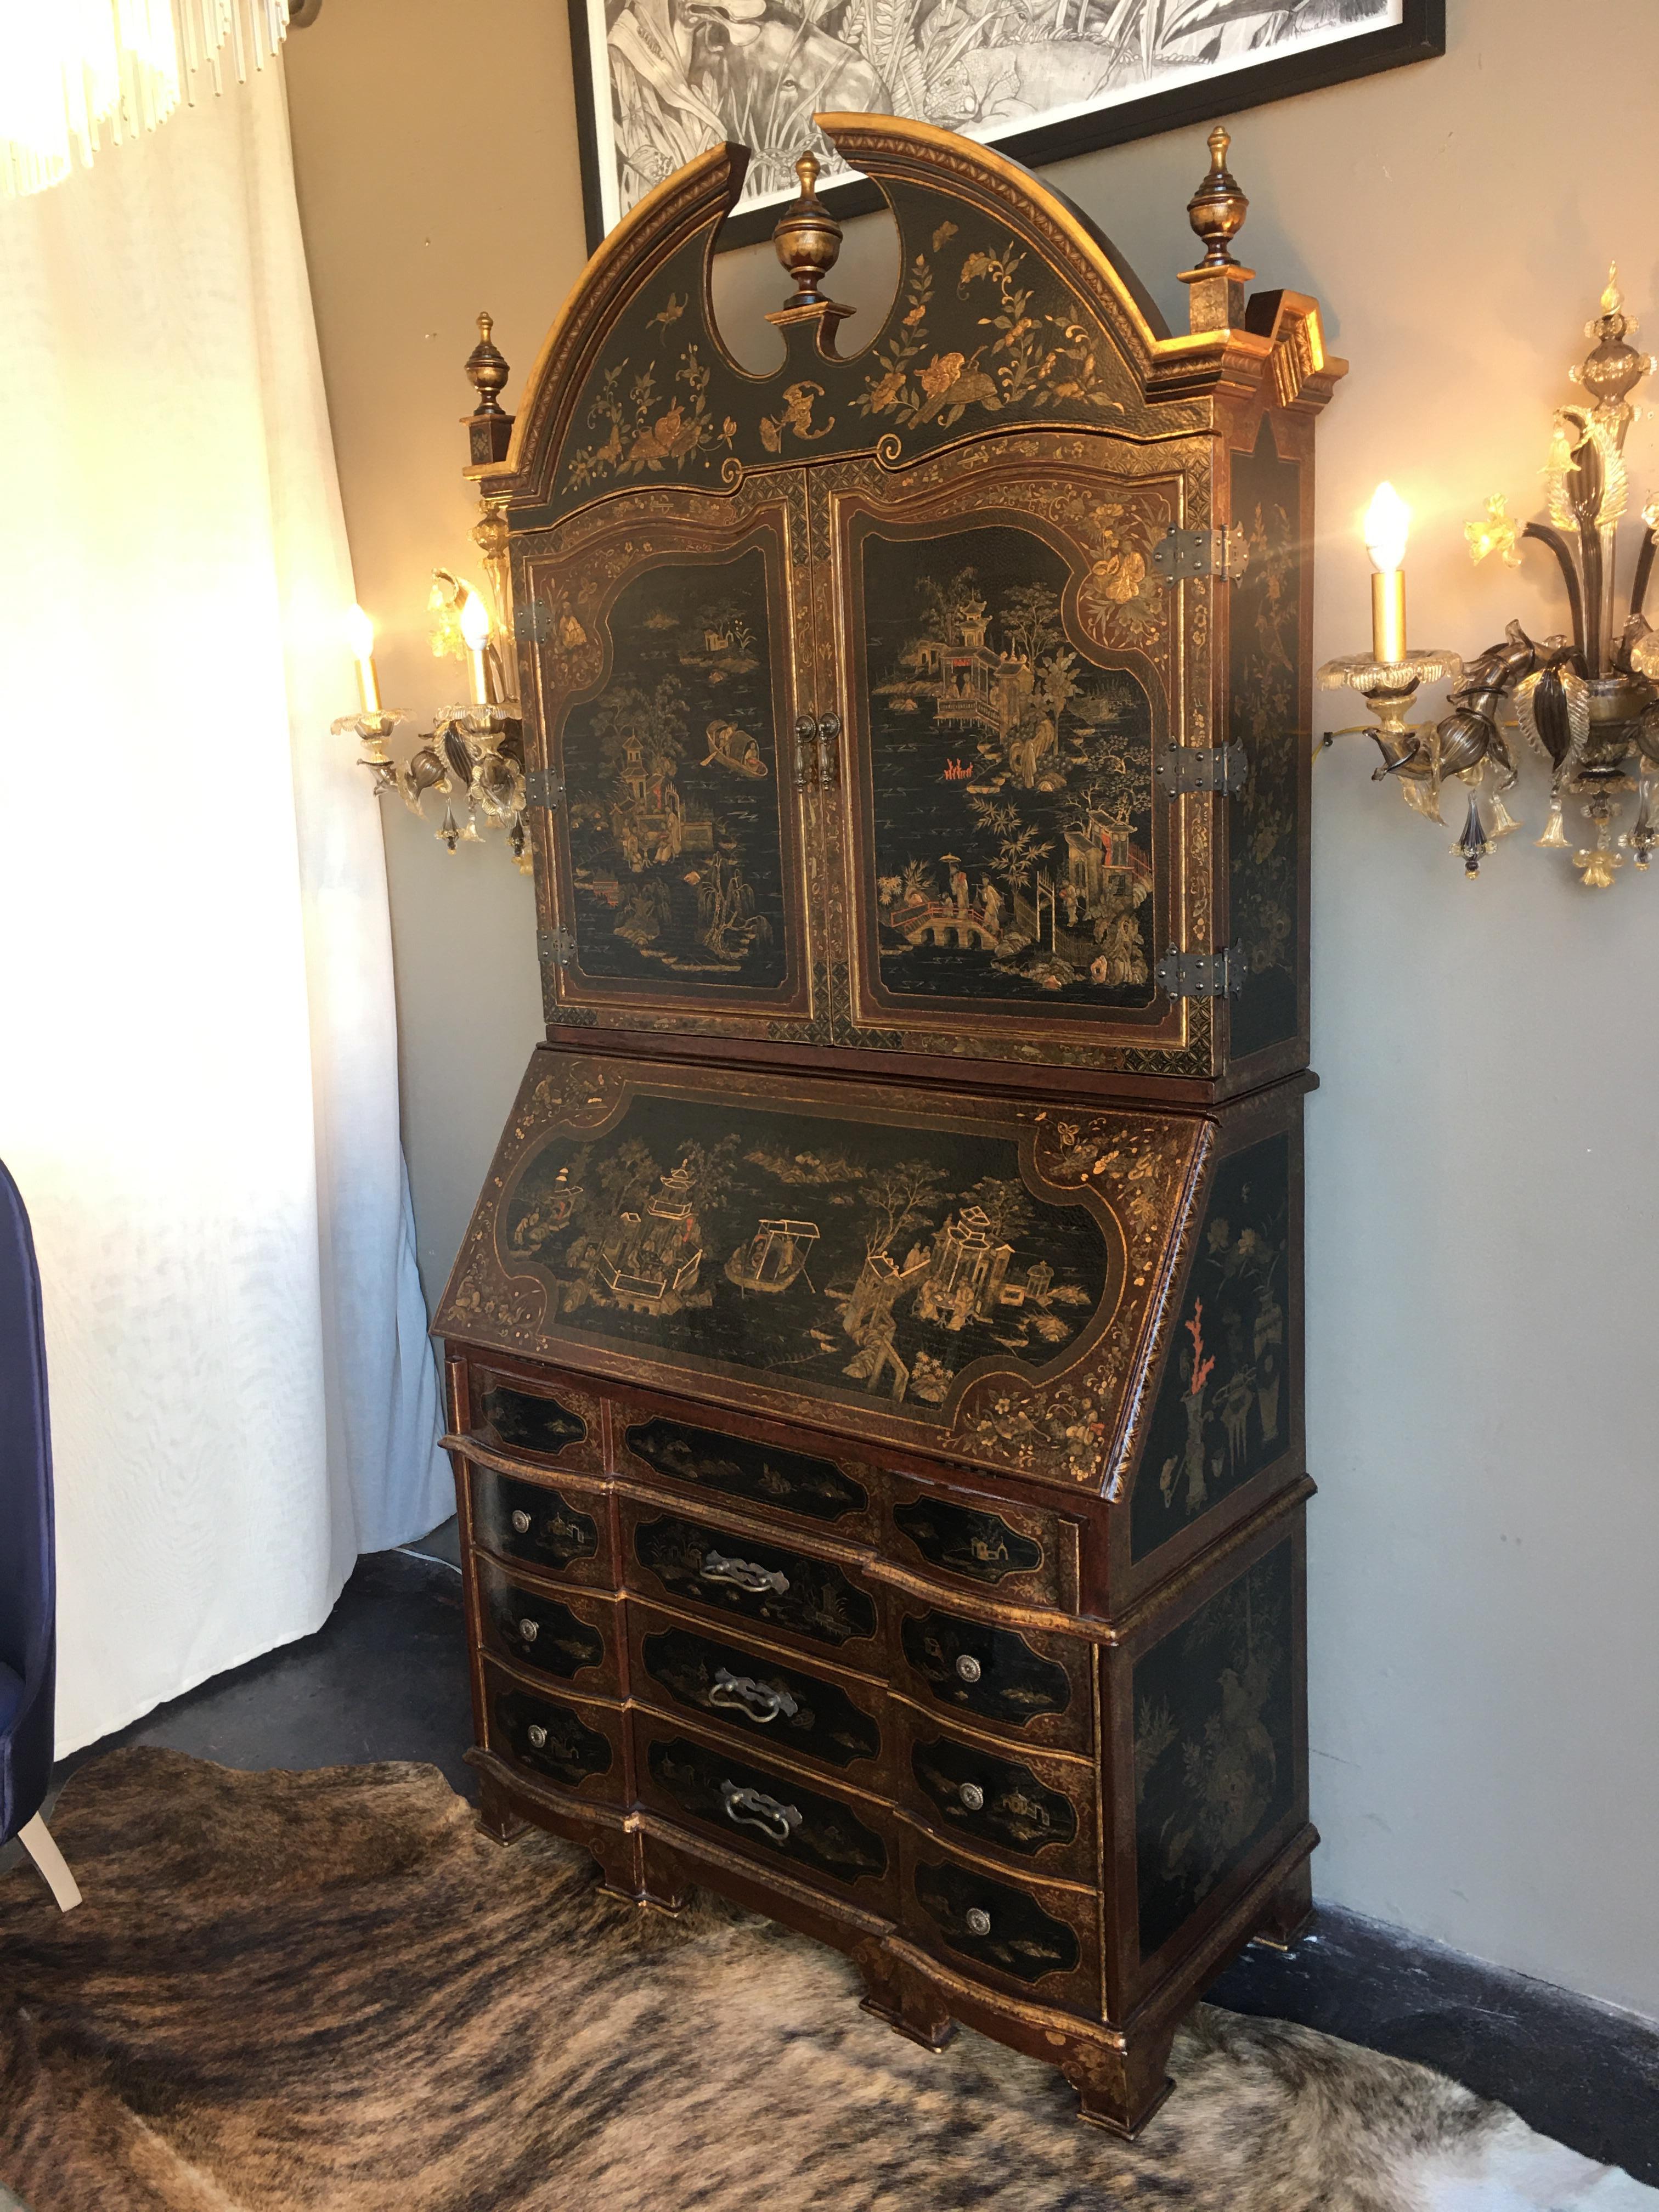 Chinoiserie secretary desk. Books and accessories not included.
Measurements open: 84 inches H x 66 inches W x 34.75 inches D.